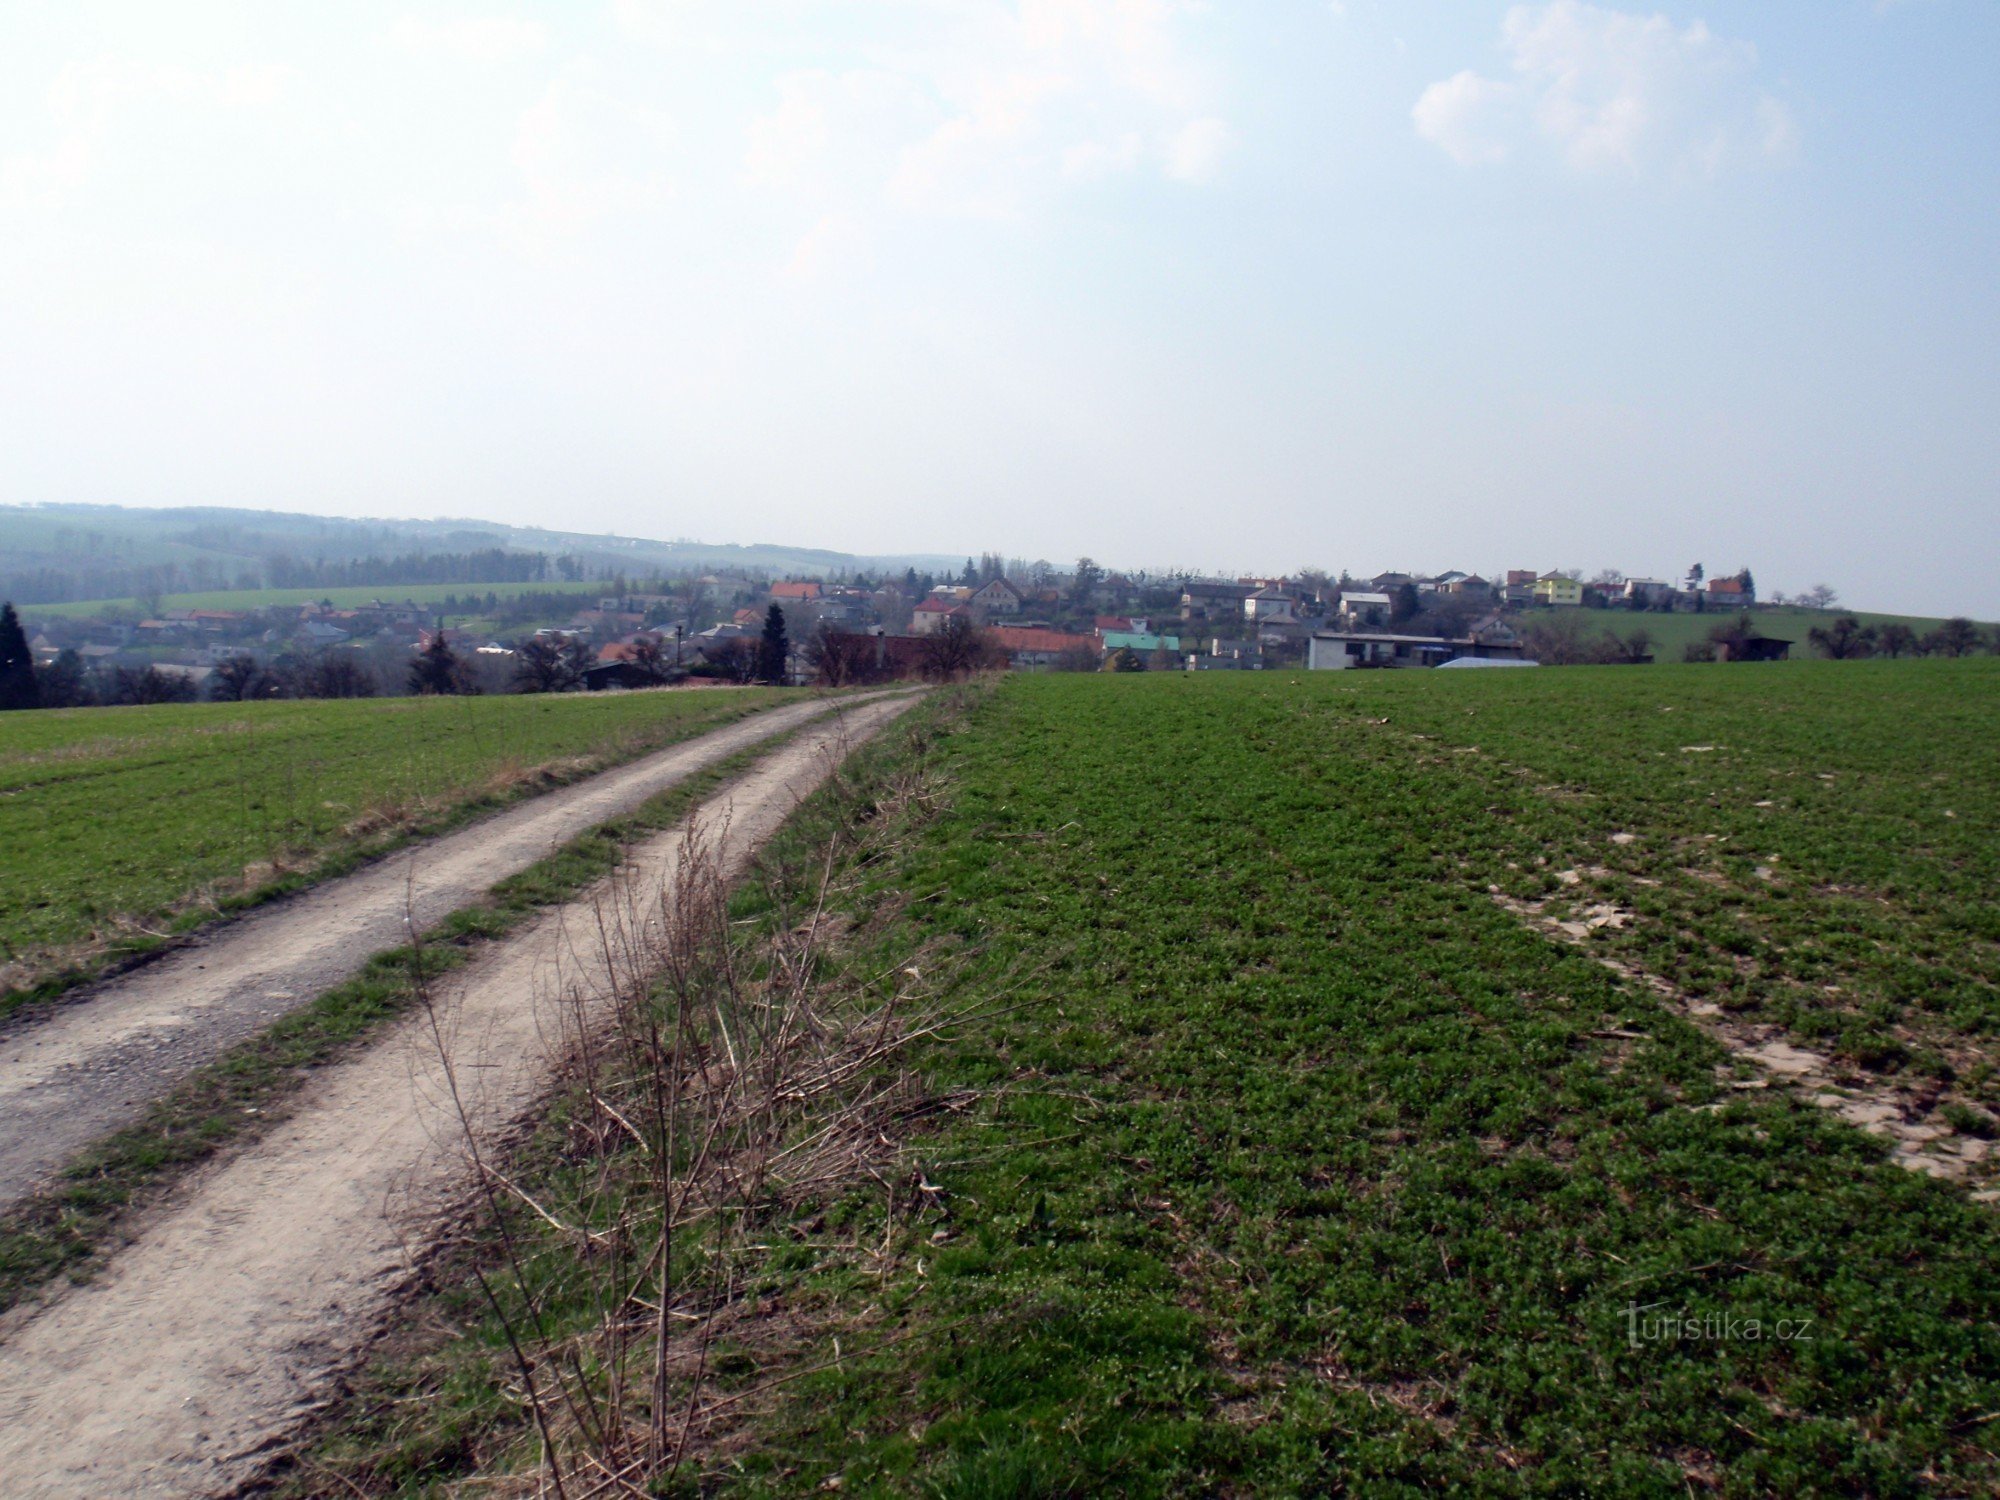 The village of Zbyslavice from cycle route 6191